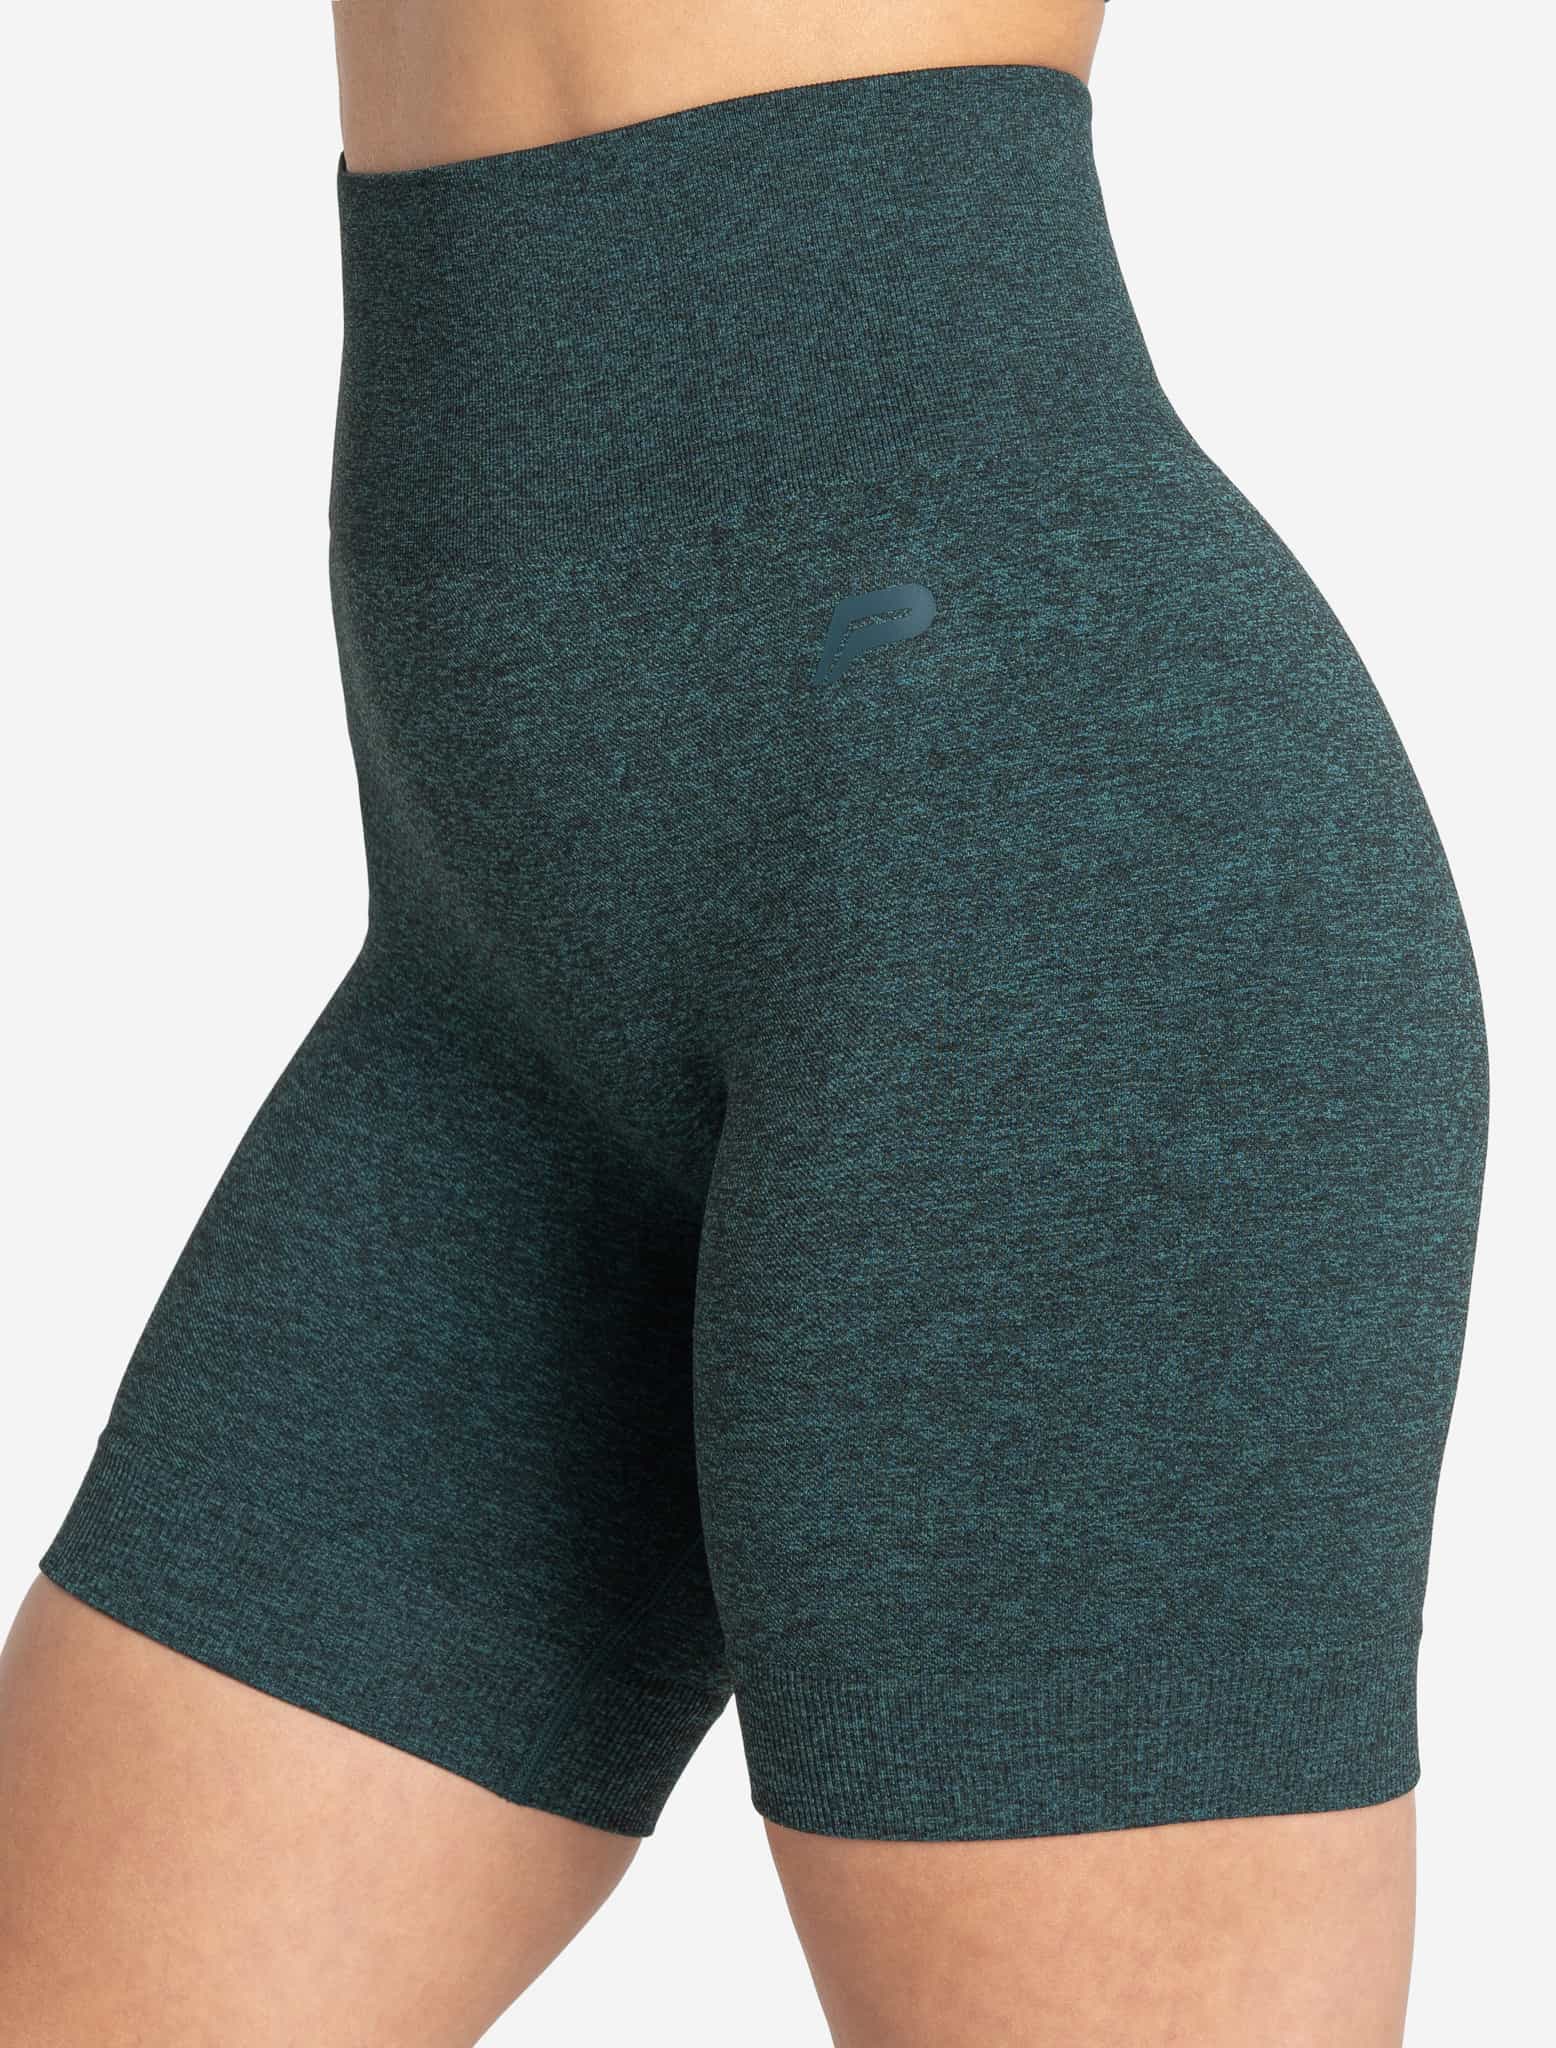 Core Seamless Shorts / Teal Marl Pursue Fitness 2